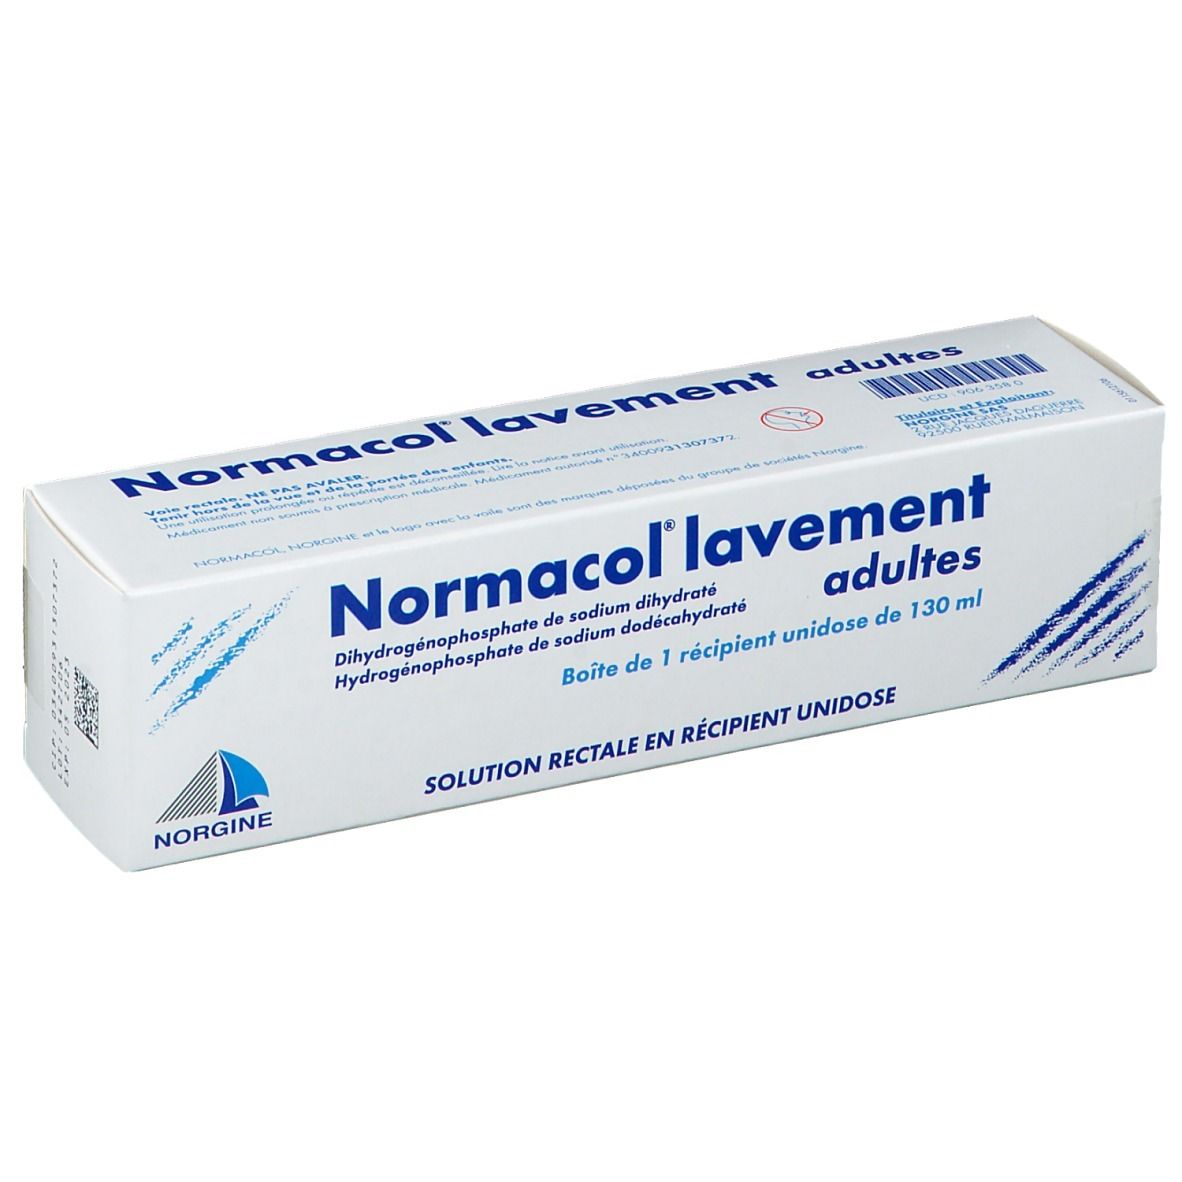 Norgine Normacol® lavement adults 130 ml - Redcare Pharmacie